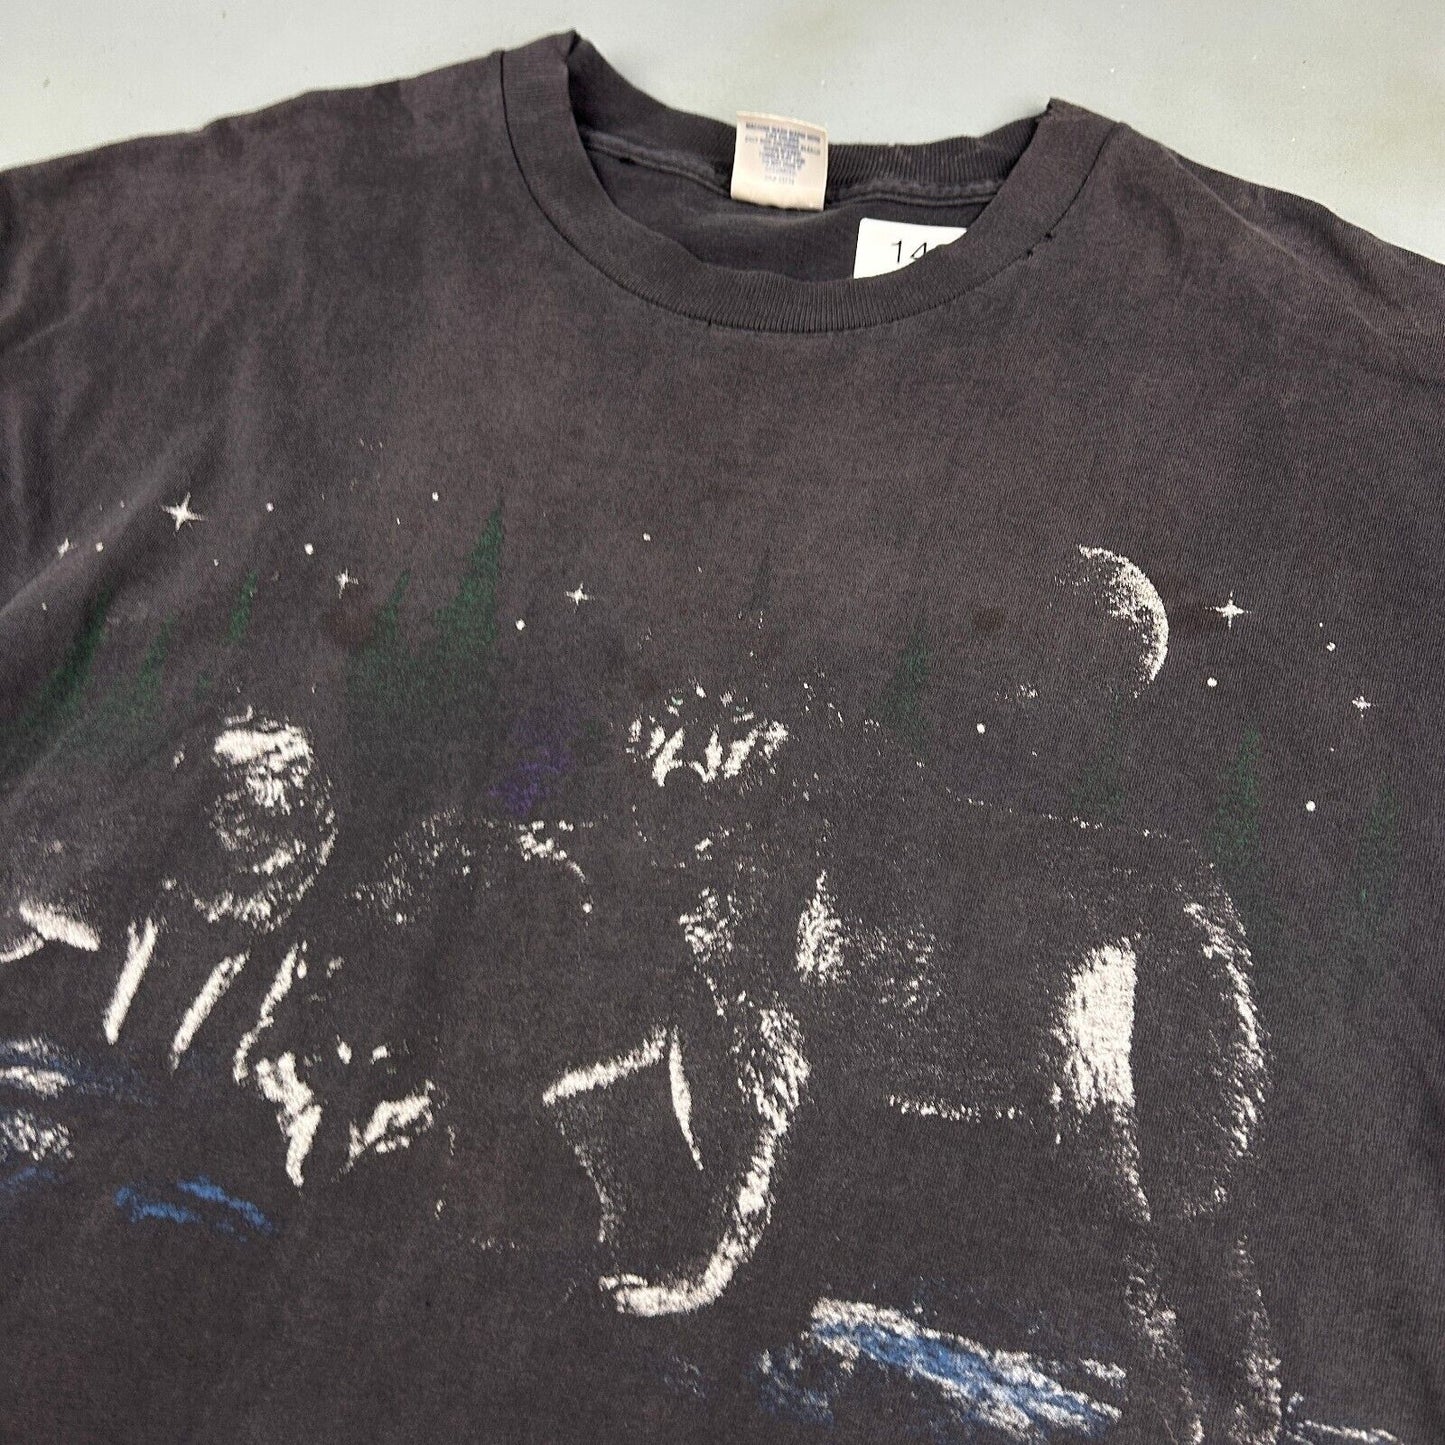 VINTAGE 90s Grand Canyon Faded Black Wolves Outdoor T-Shirt sz Large Adult